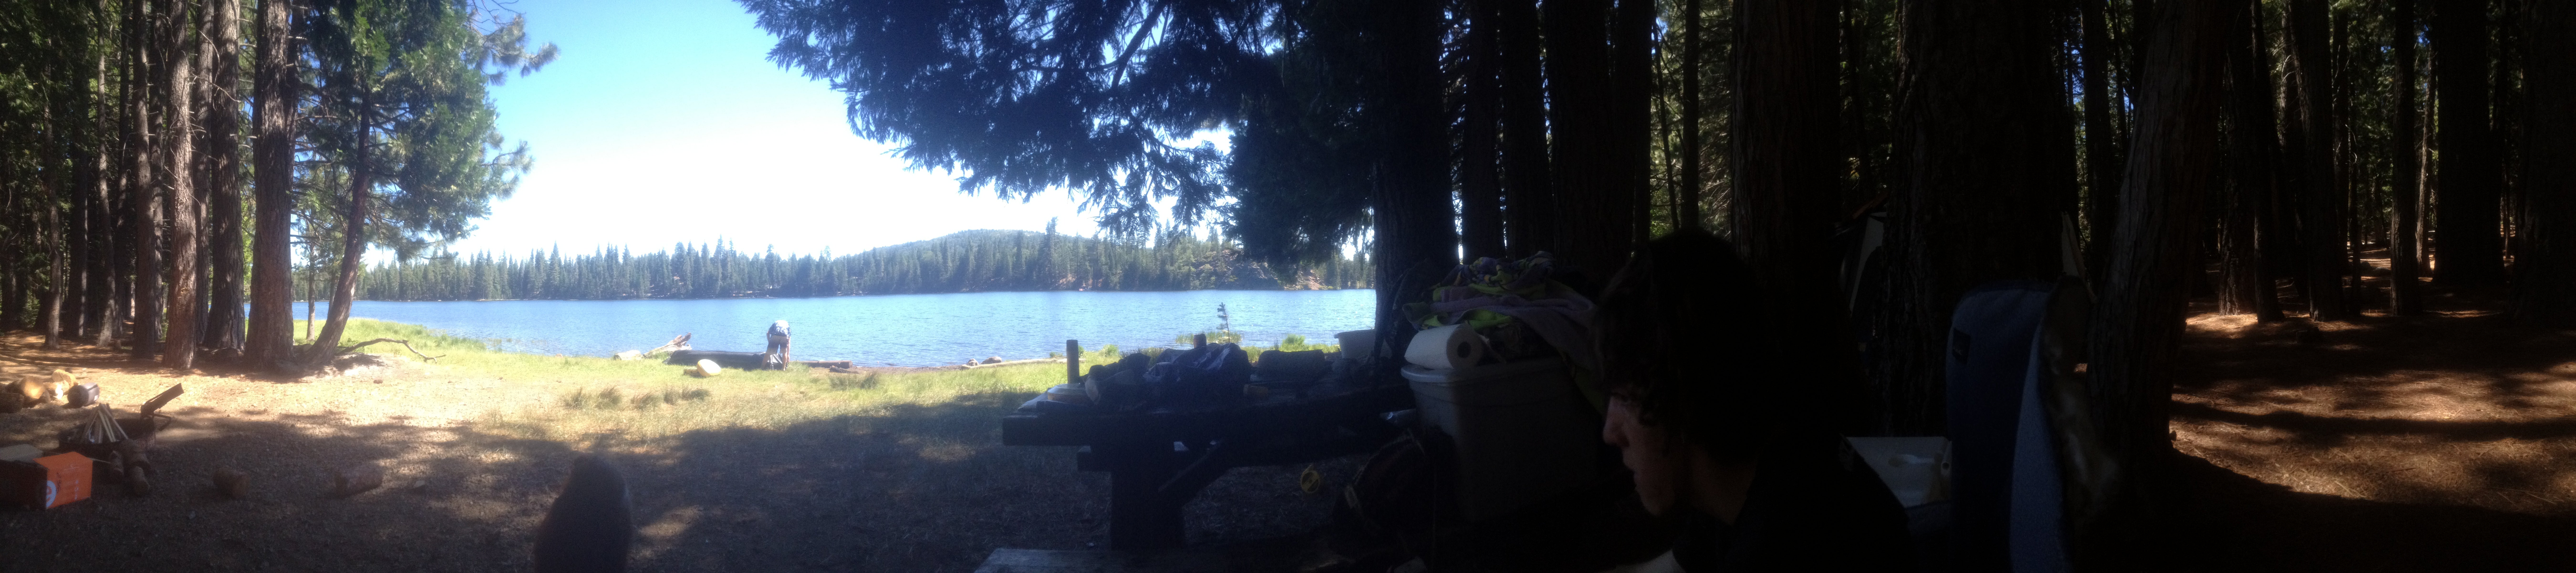 Camper submitted image from Rucker Lake Campground - 4